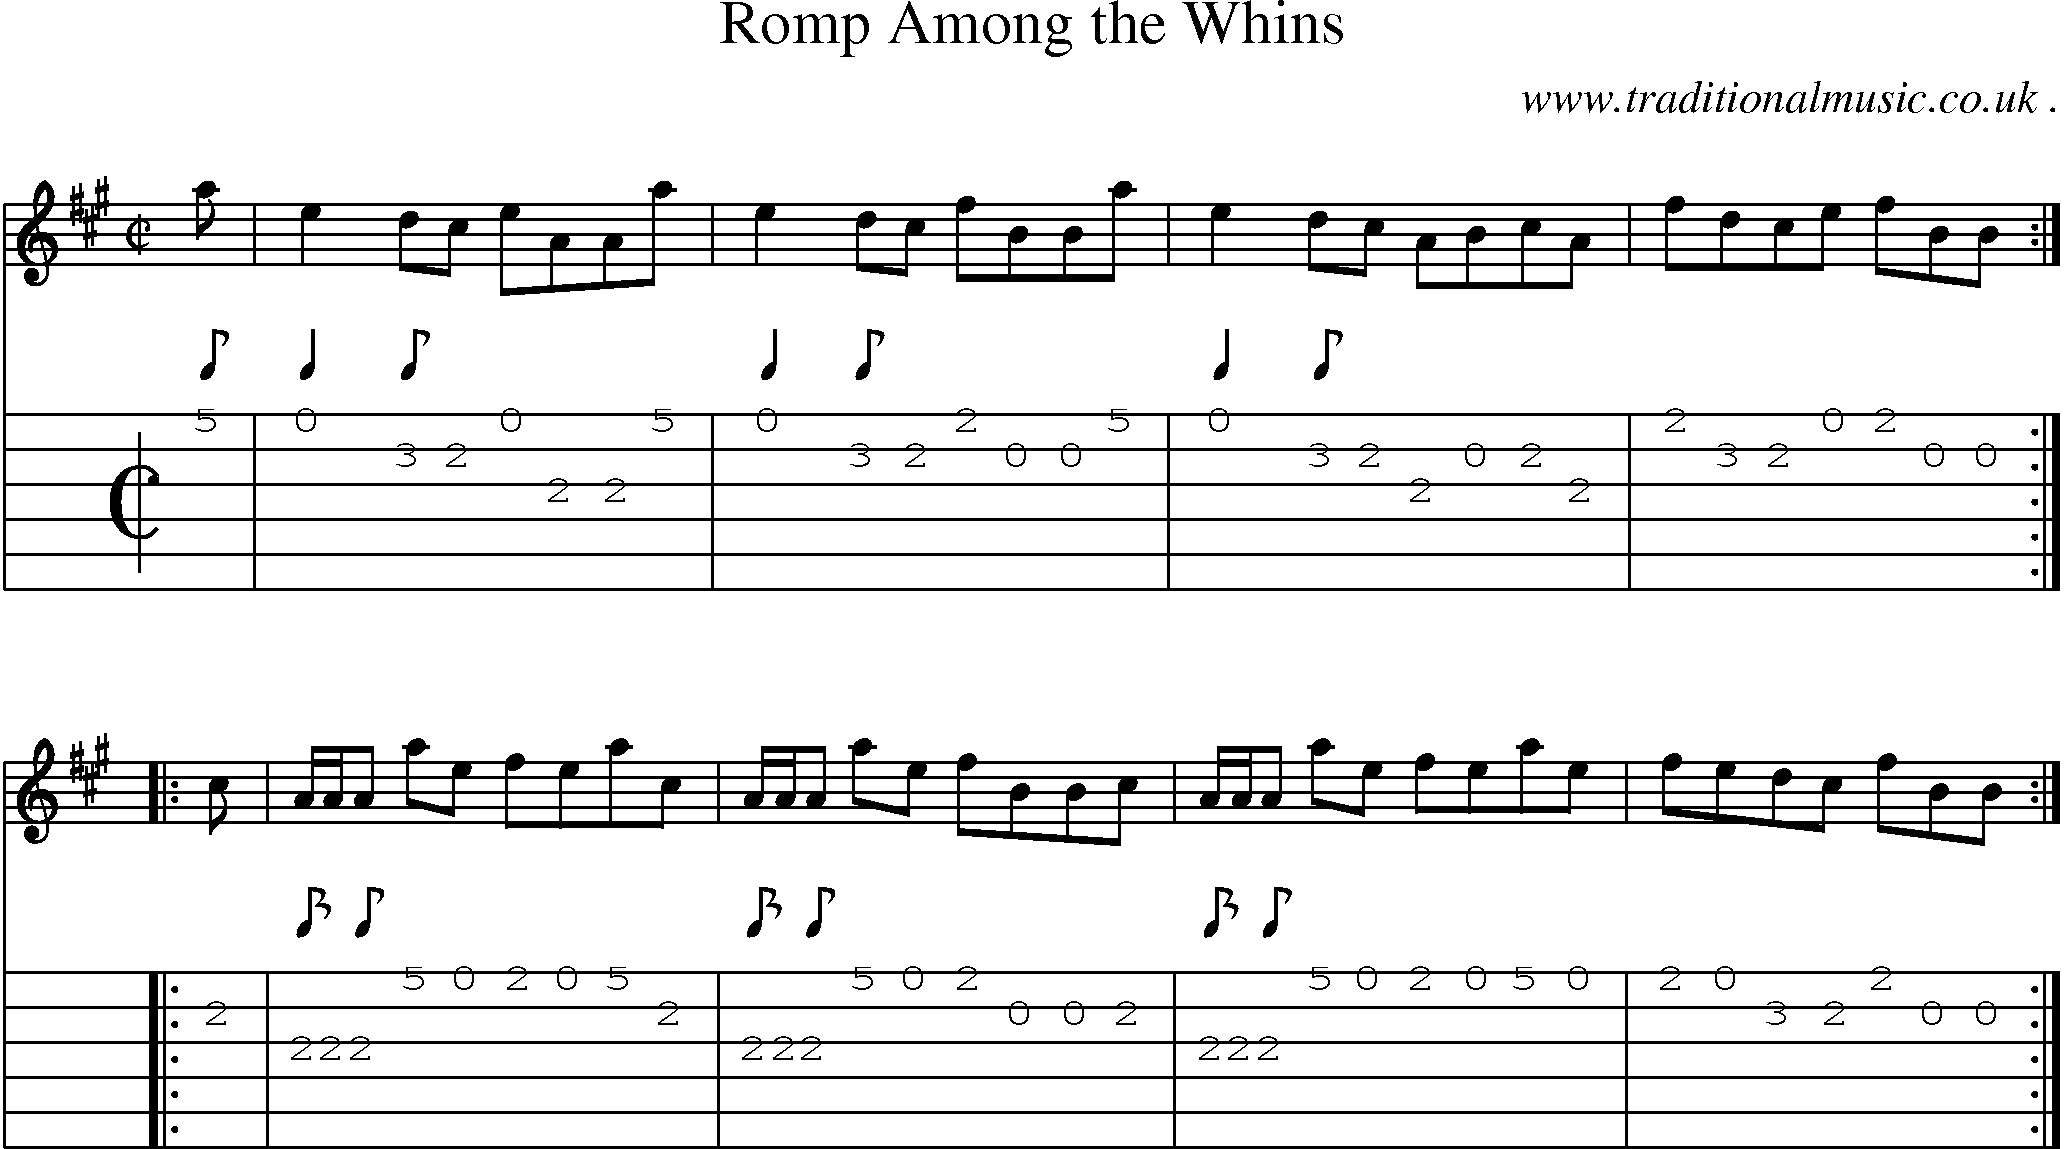 Sheet-music  score, Chords and Guitar Tabs for Romp Among The Whins